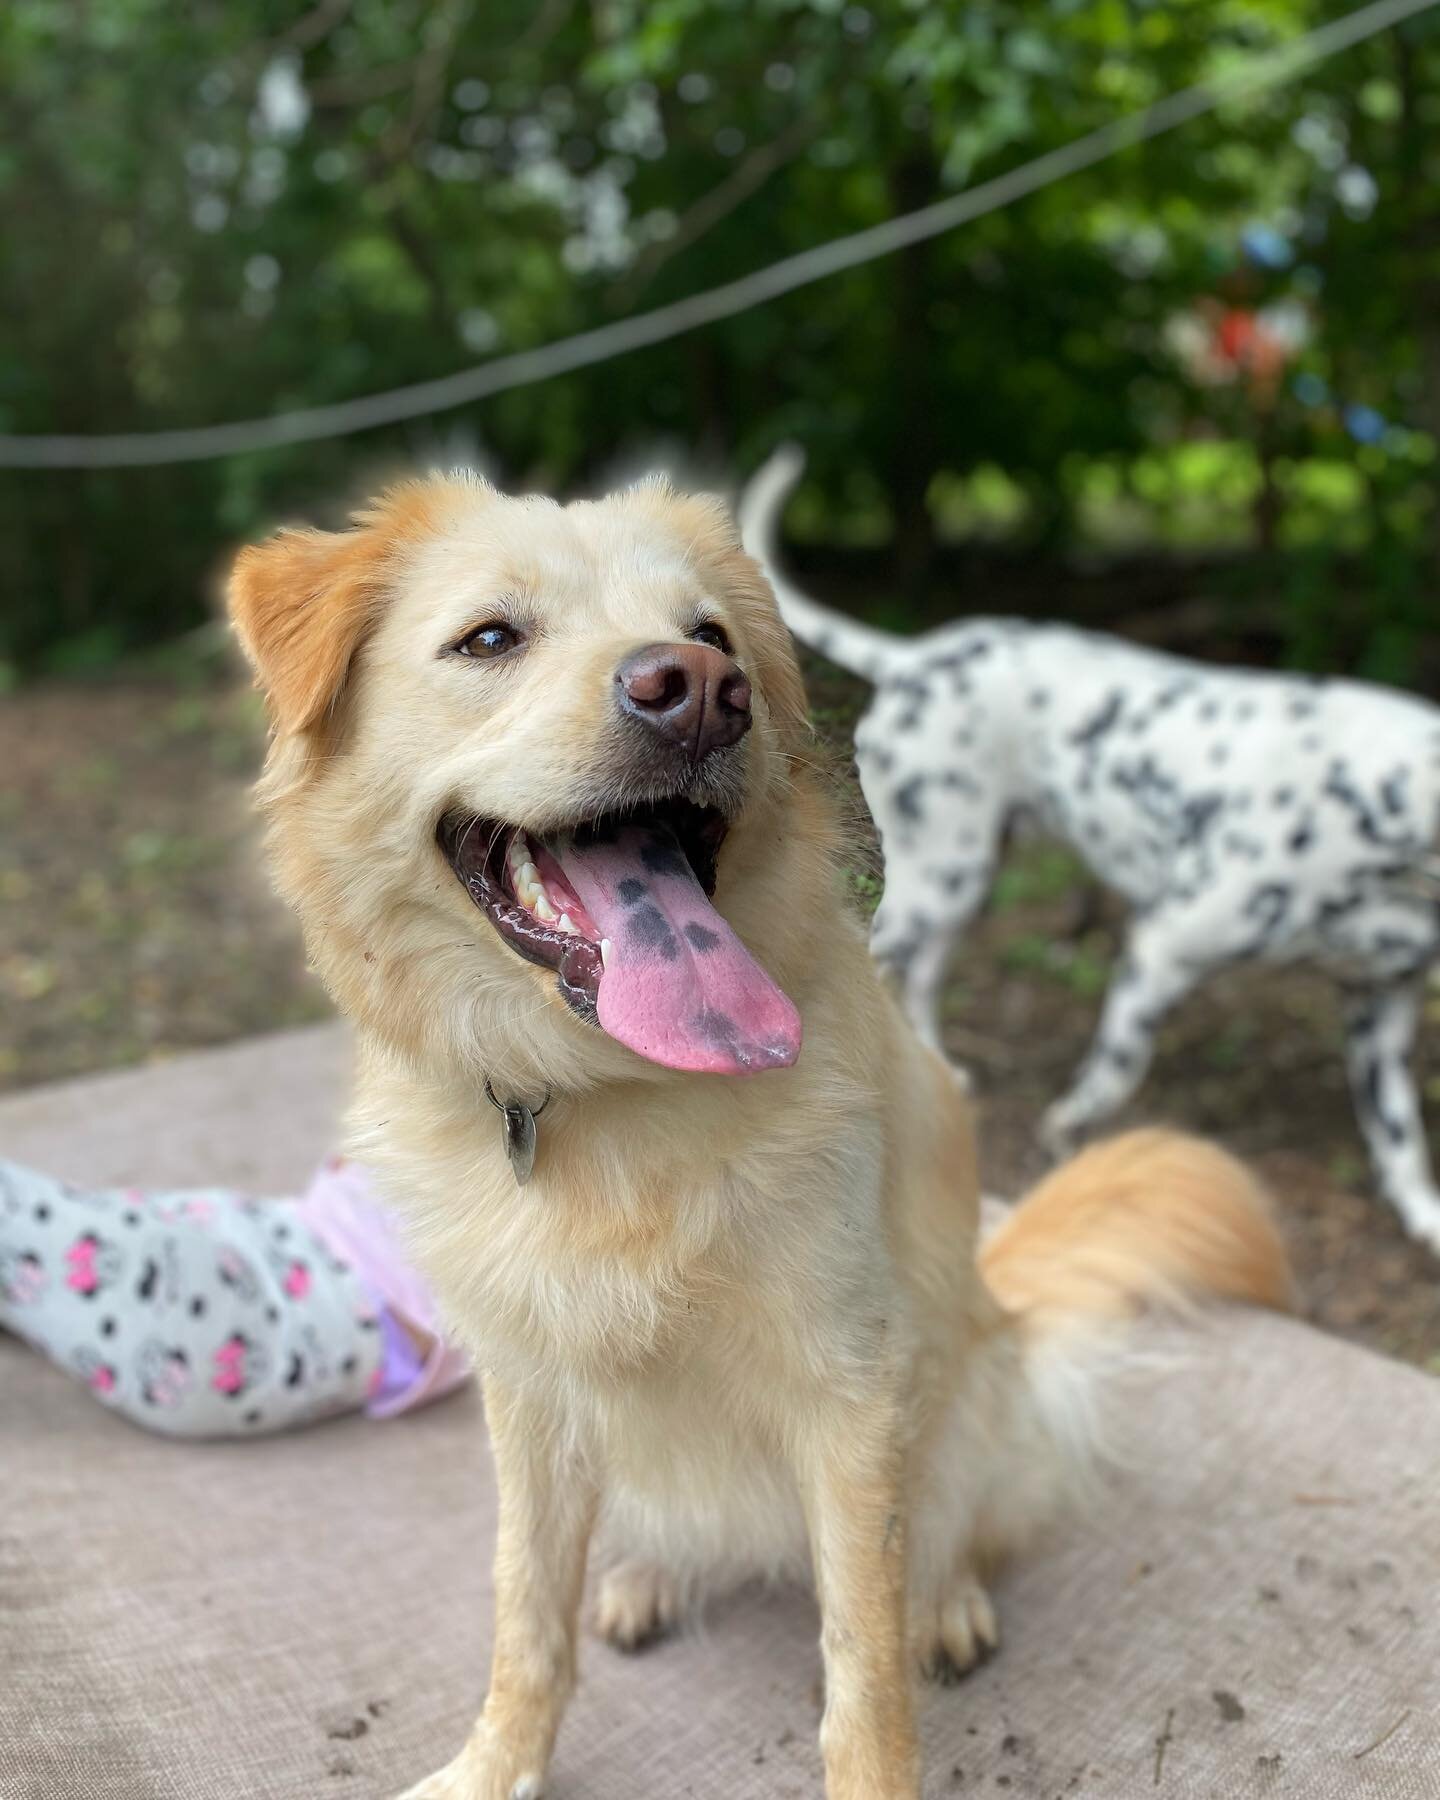 Summer time is here! Is your pup ready for fun??? Whether he/she loves to fetch, run, tug-a-war, or lots of love and attention. We special in it all. 😊🐾

#Tailswaggers #Luxurydaycare #fortworthdogs